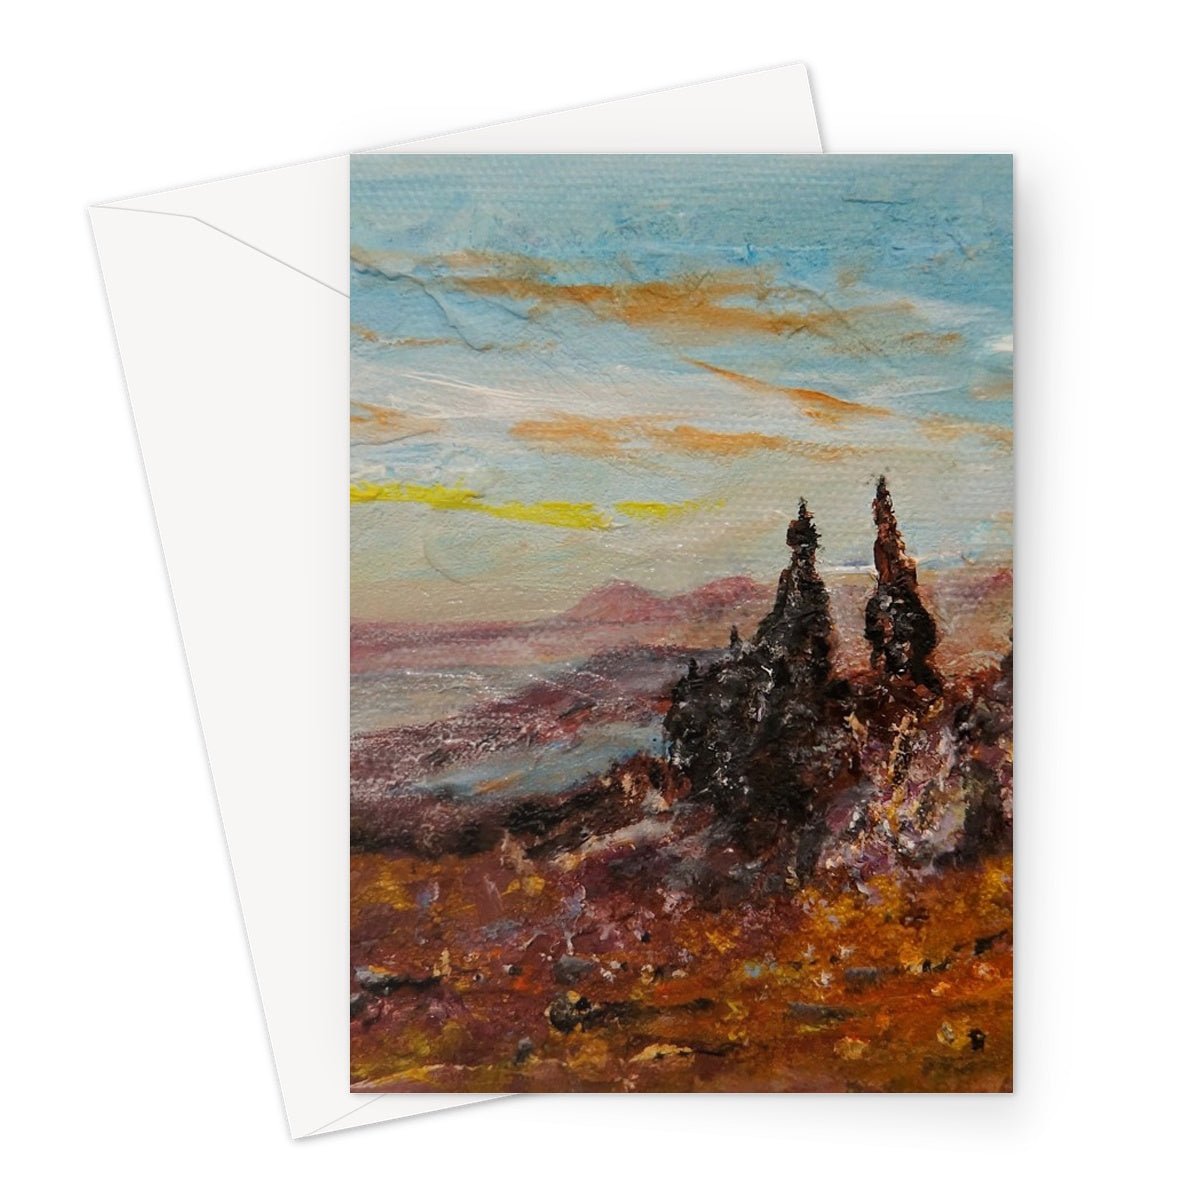 The Old Man Of Storr Skye Art Gifts Greeting Card-Greetings Cards-Skye Art Gallery-A5 Portrait-10 Cards-Paintings, Prints, Homeware, Art Gifts From Scotland By Scottish Artist Kevin Hunter